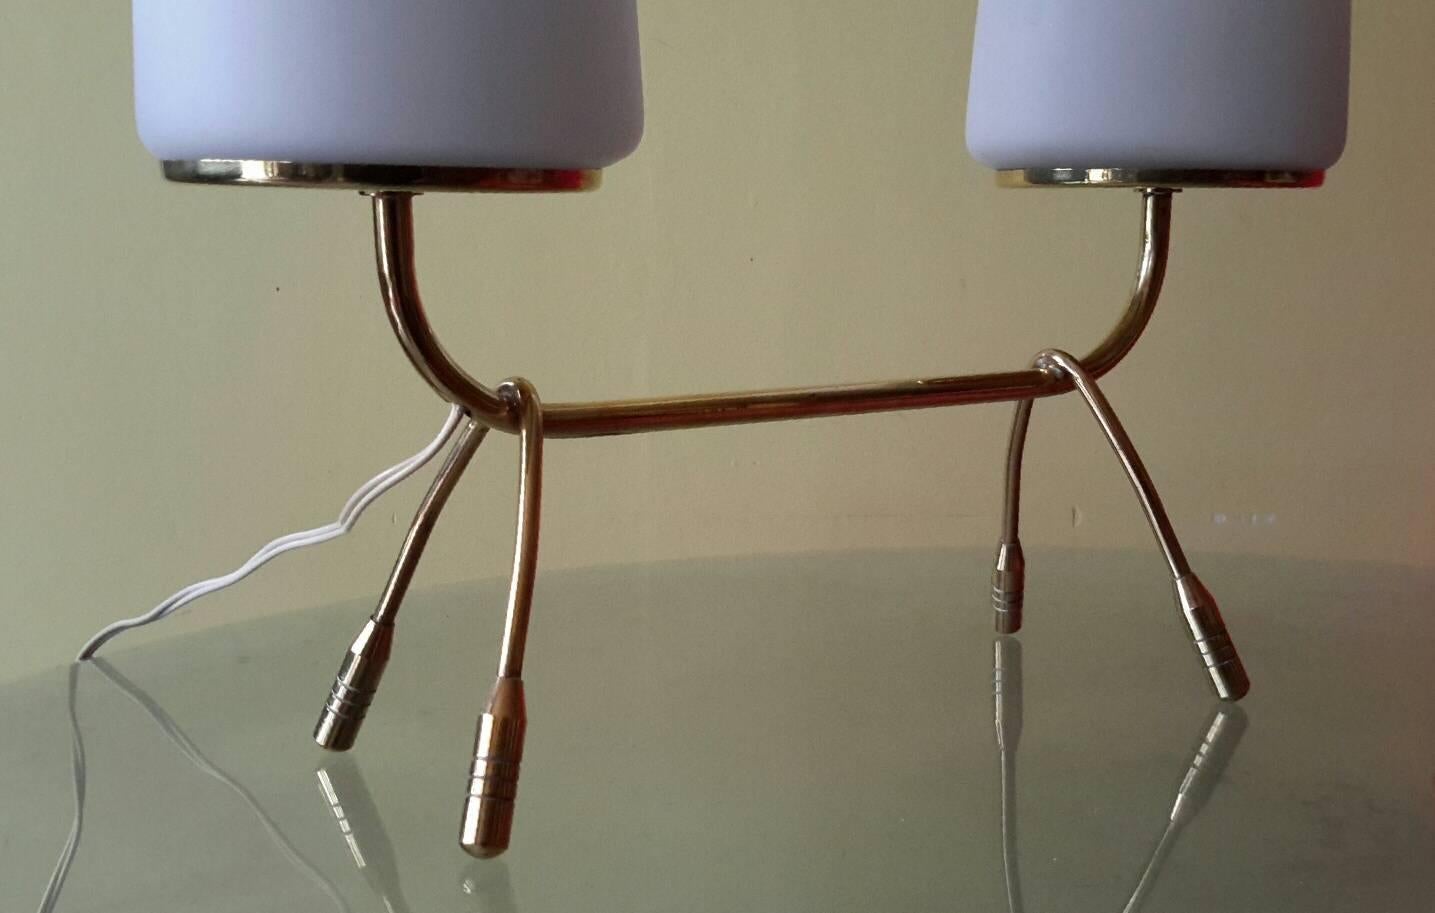 Beautiful brass Minimalist structure table lamp with large opaline diffuser, France, 1950s
The lamp is in excellent condition with two large diffusers in mat white opaline.
The wiring fit to US standards.

Dimensions: 
Height with opaline 43 cm